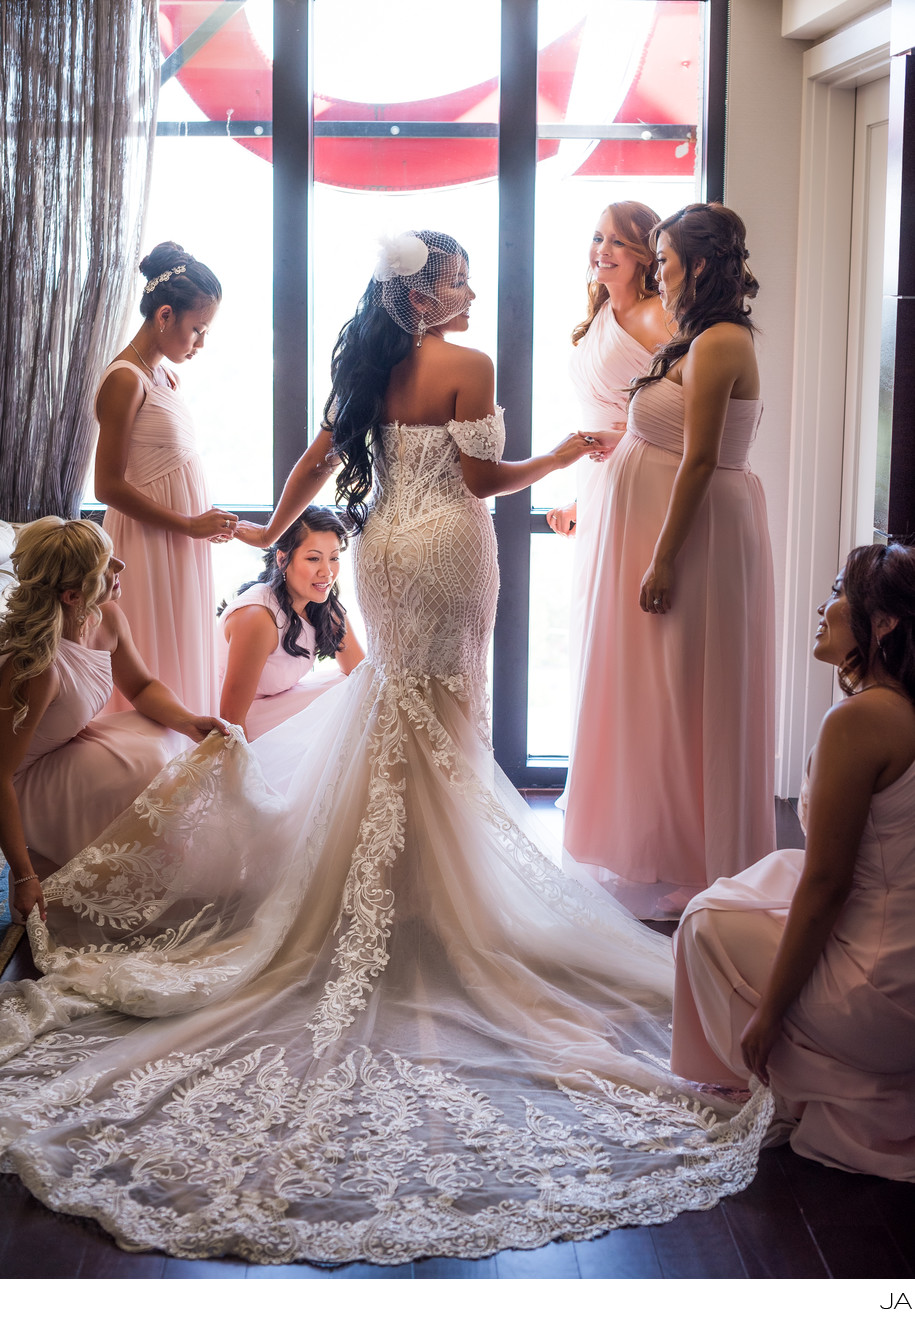 Bridal Prep - The Time Before the Wedding Ceremony